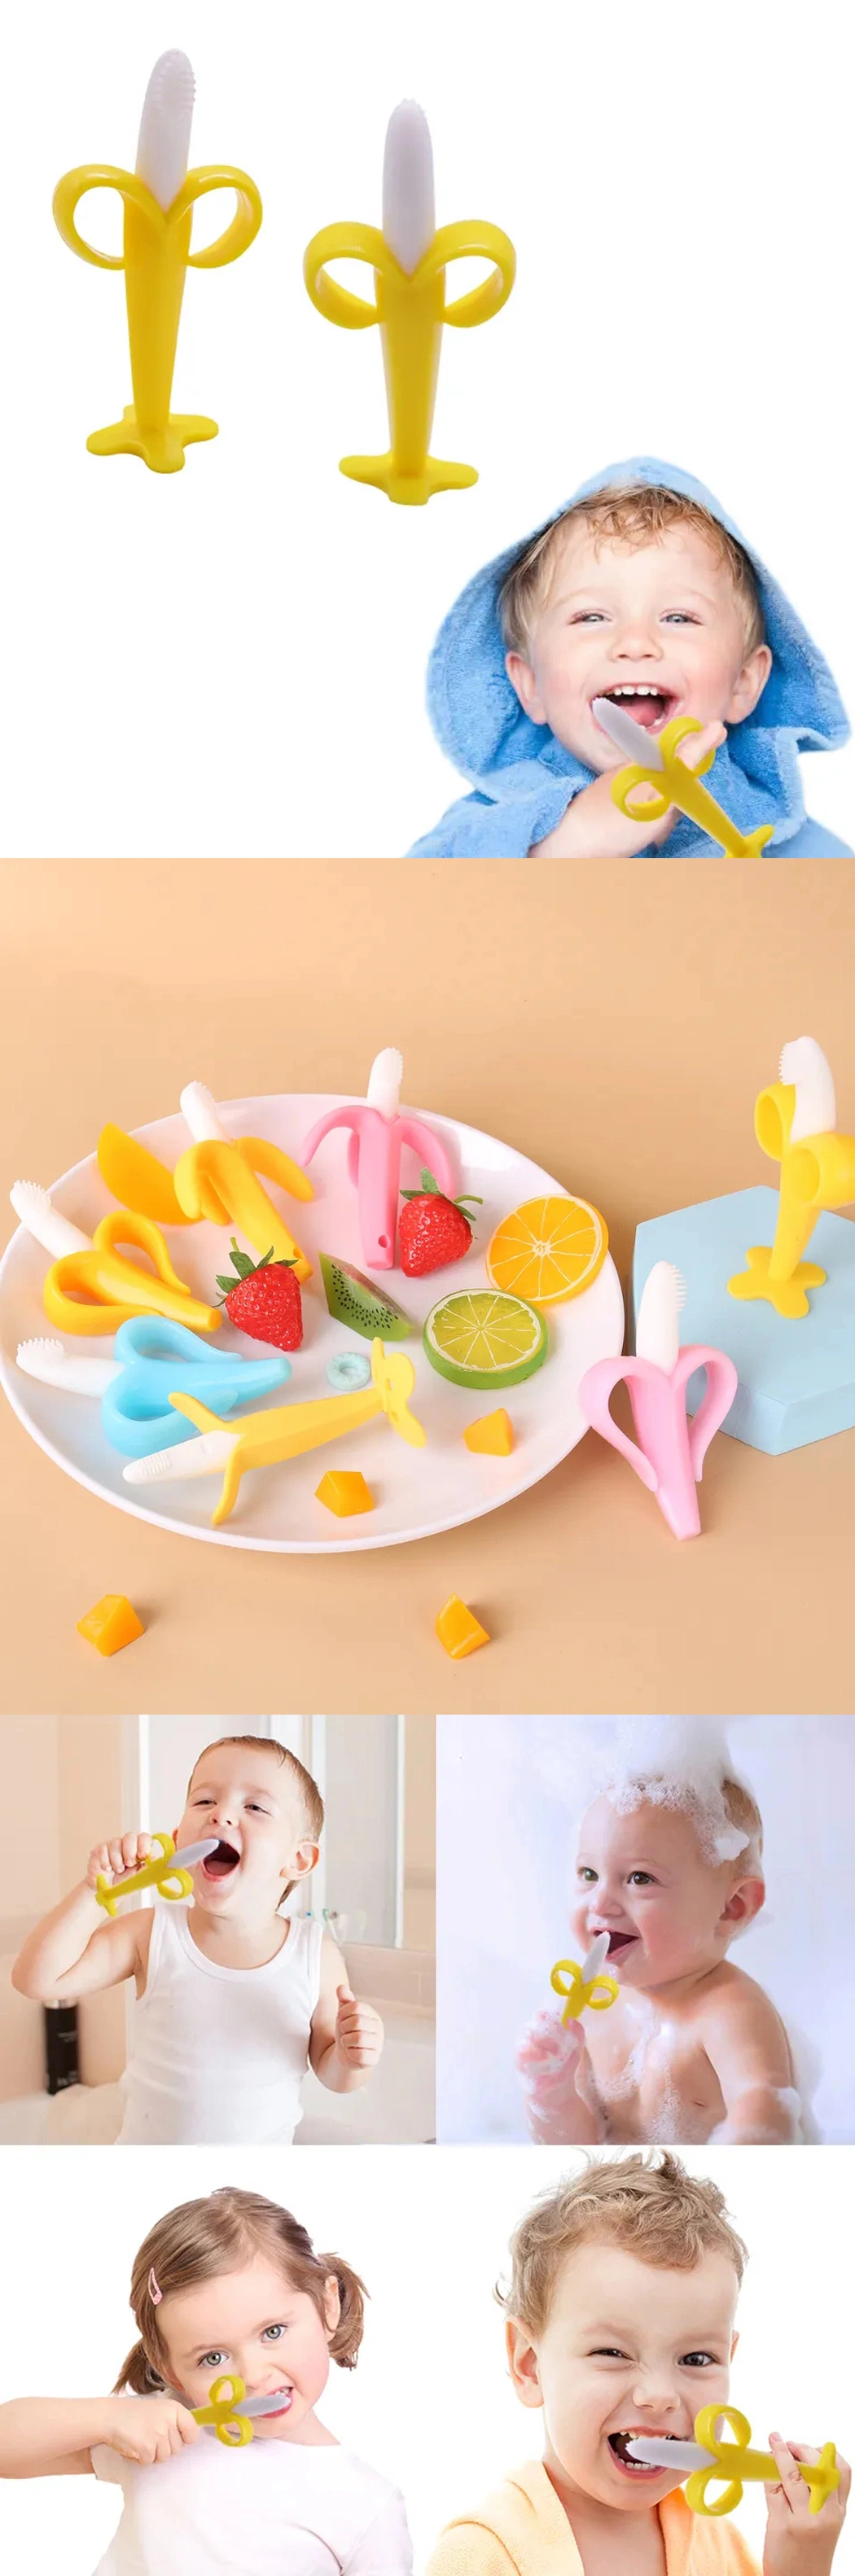 Banana Shape Food Grade Safety Silicone Teethers Baby Rubber Handle Toothbrush